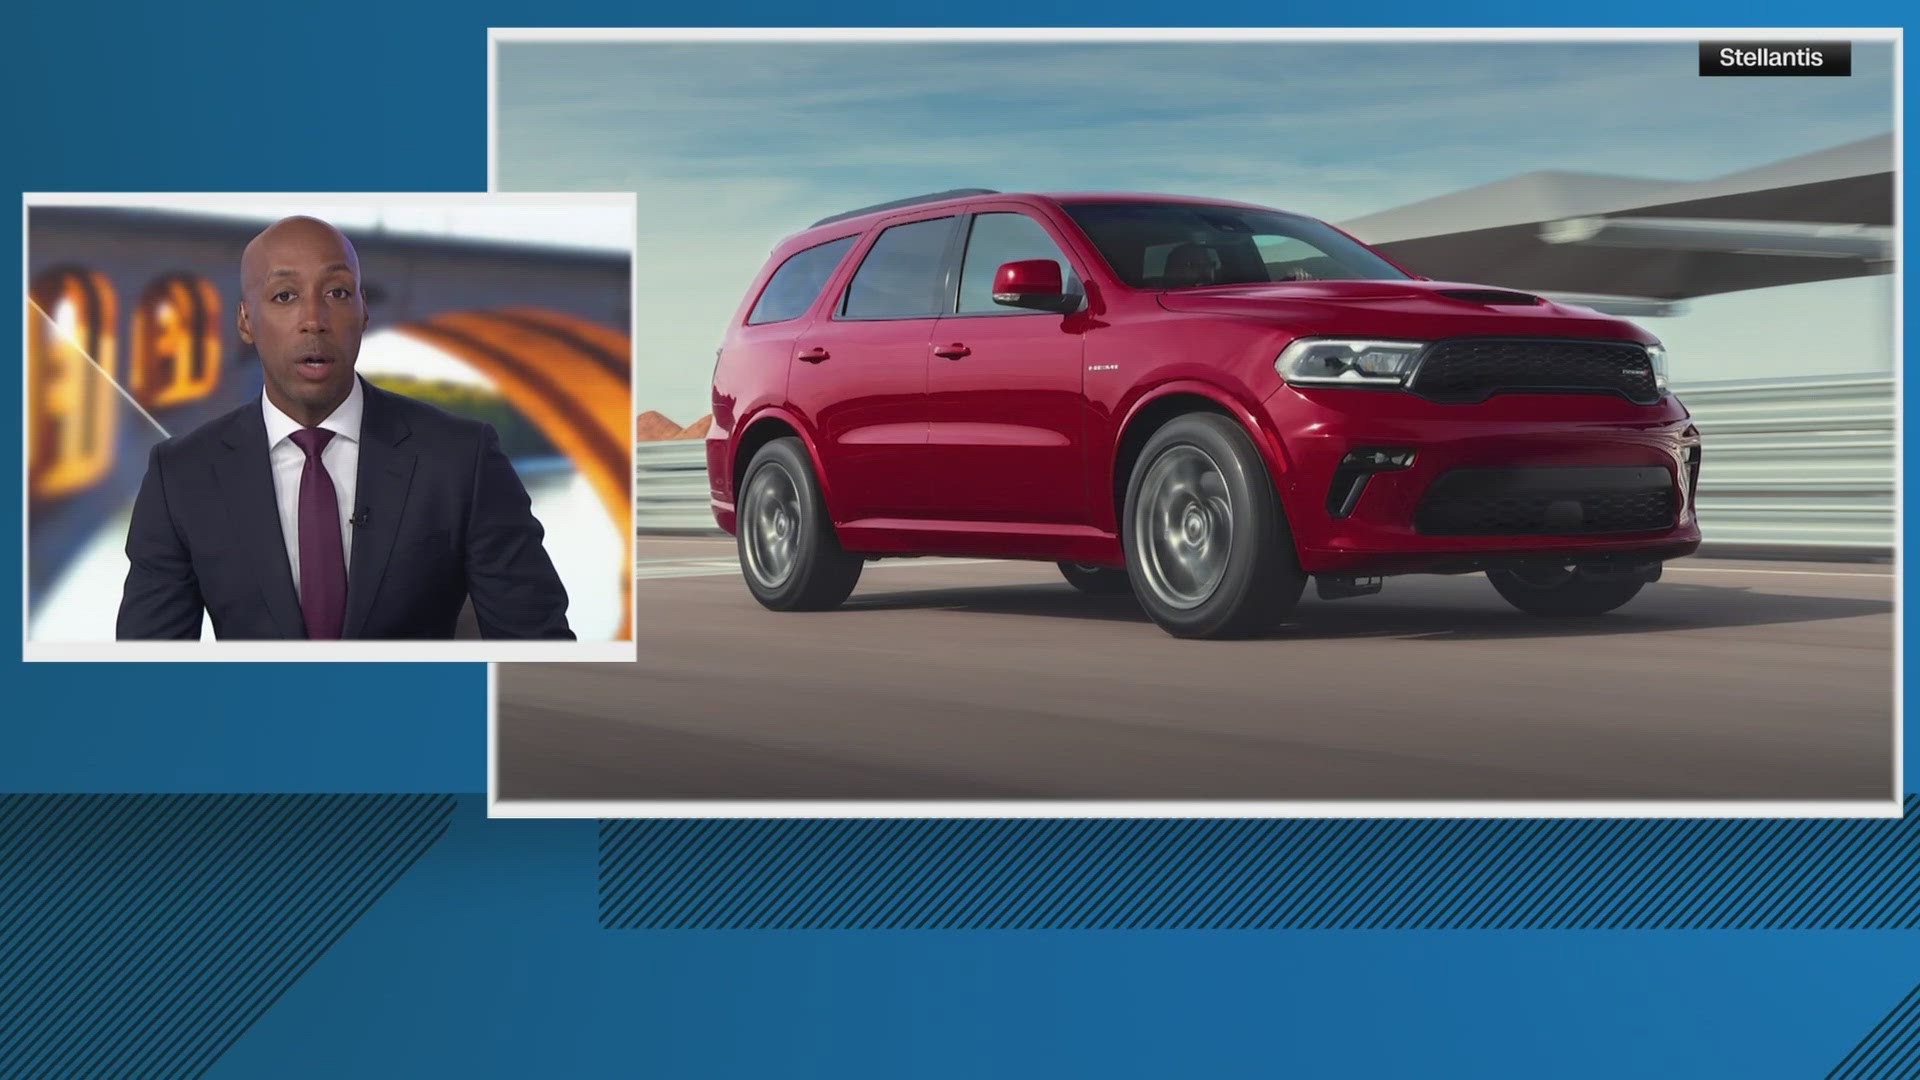 The recall involves 19 different Chrysler Jeep and Dodge models built between 2021 and 2023.